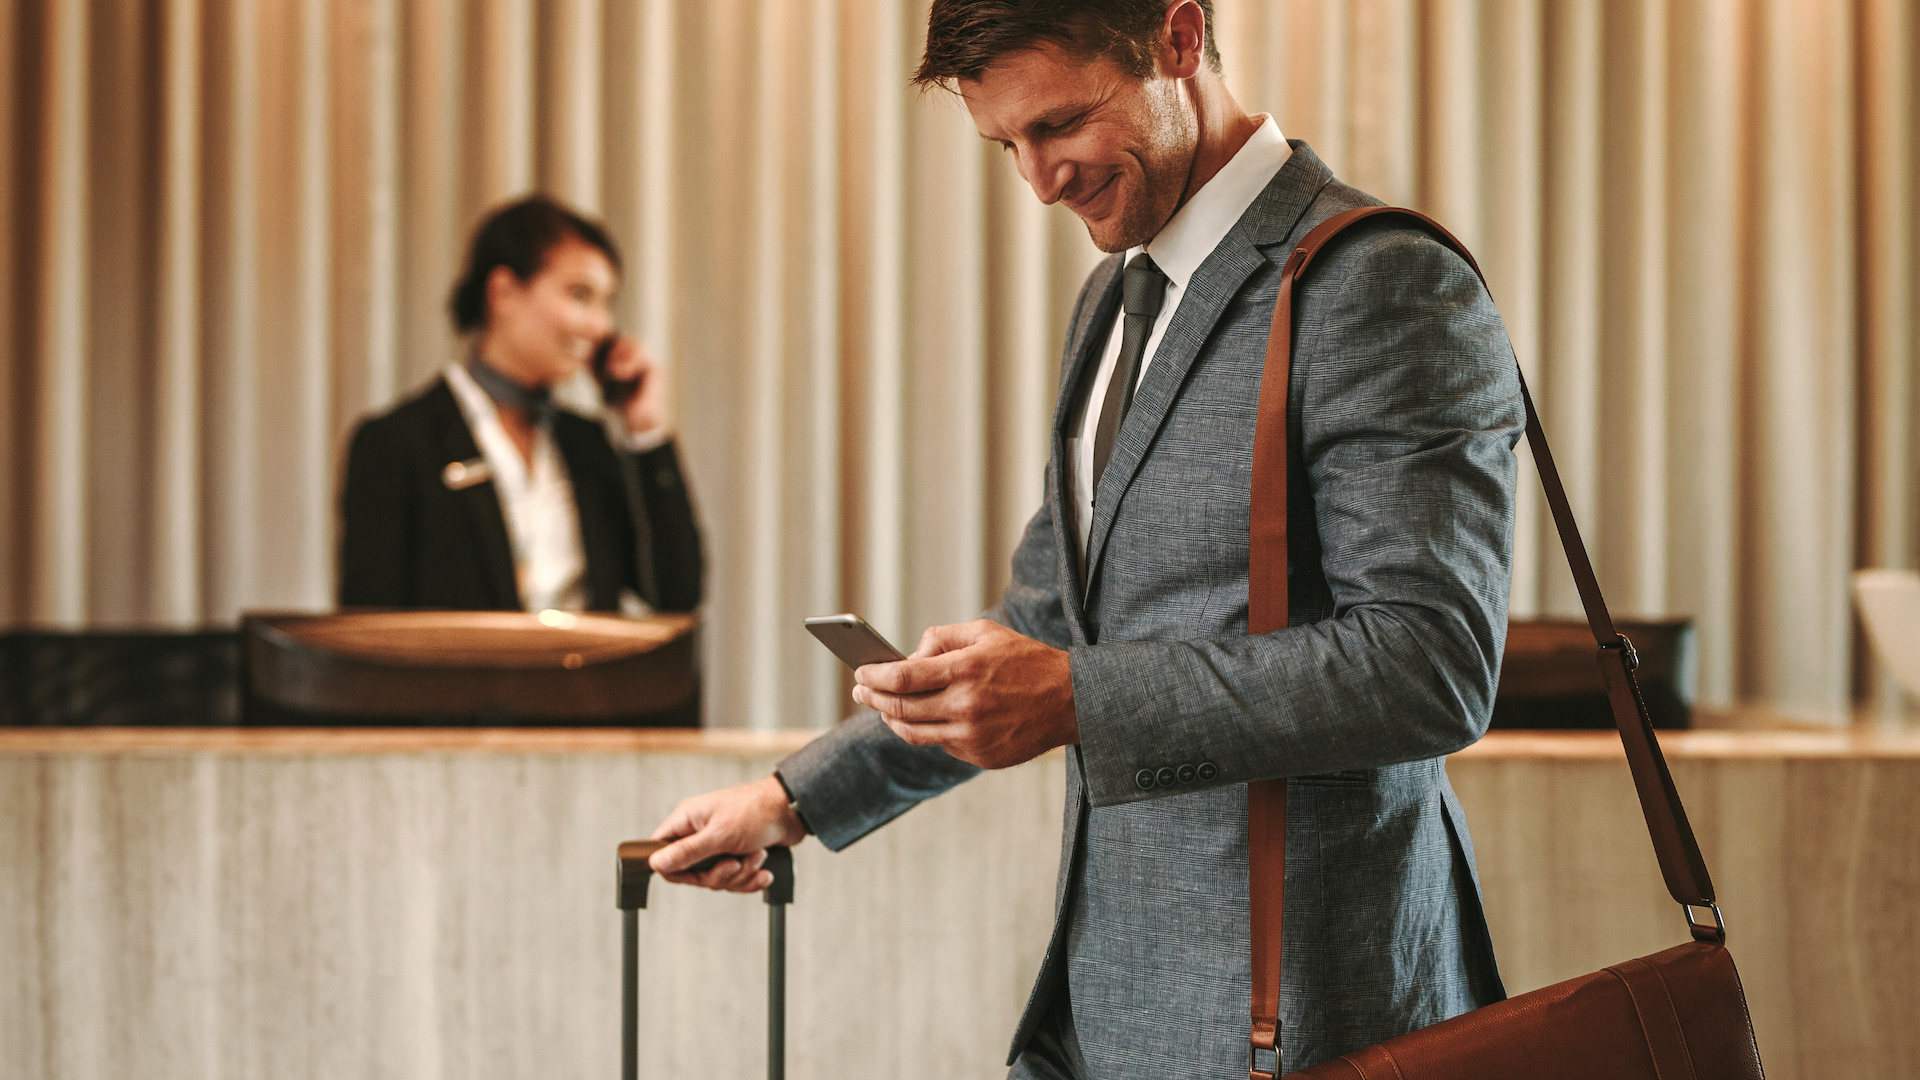 Mobile Hotel Check-In Solution. Mobile Data Capture for Hotels & Tourism.